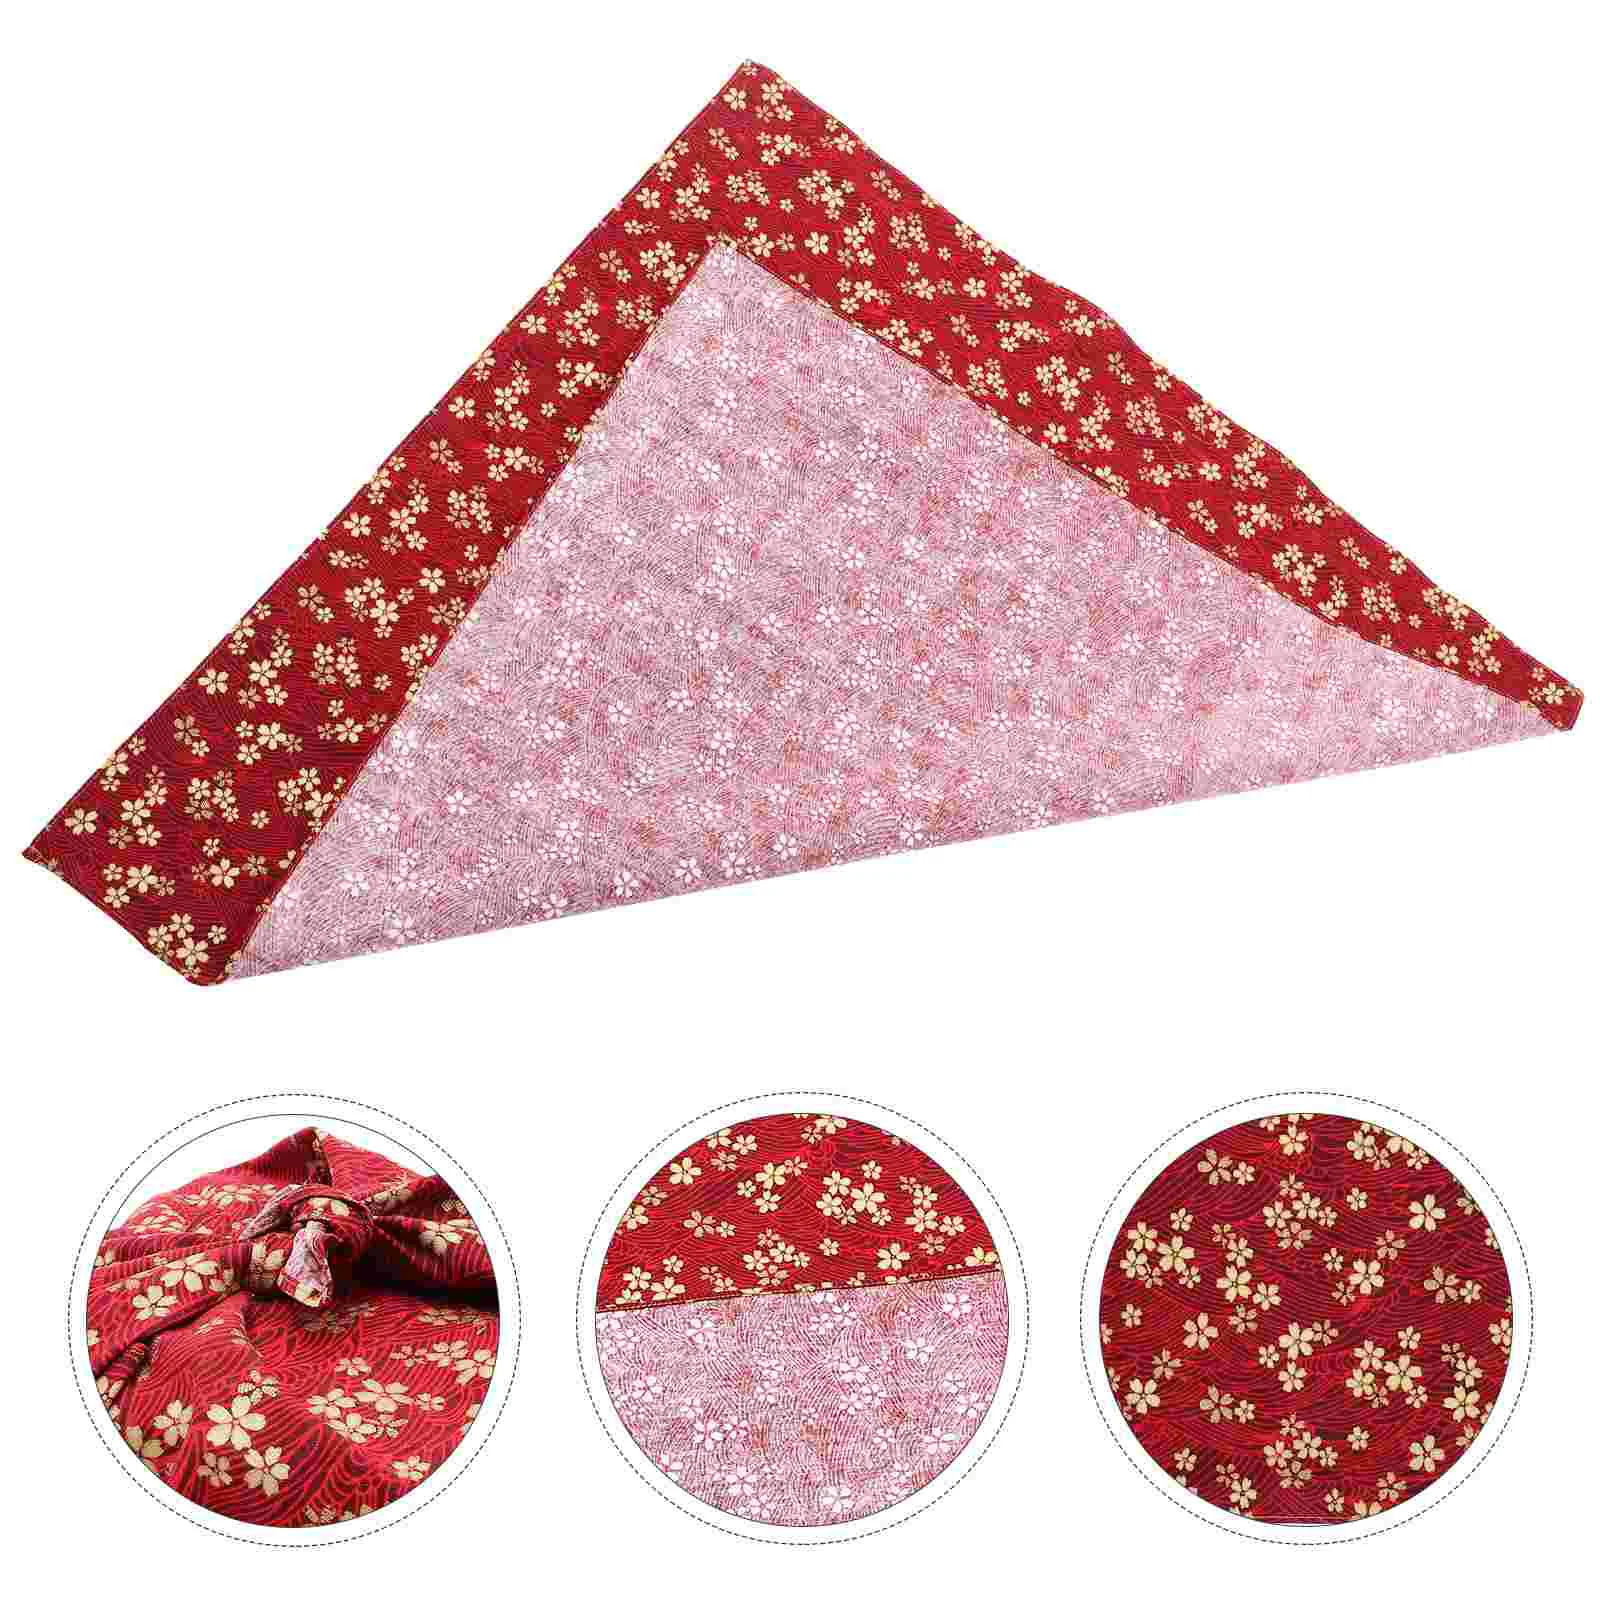 

Cloth Wrapping Box Gift Japanese Packing Bento Lunch Fabric Wrap Cotton Bandana Cover Decorative Packaging Craft Handkerchief